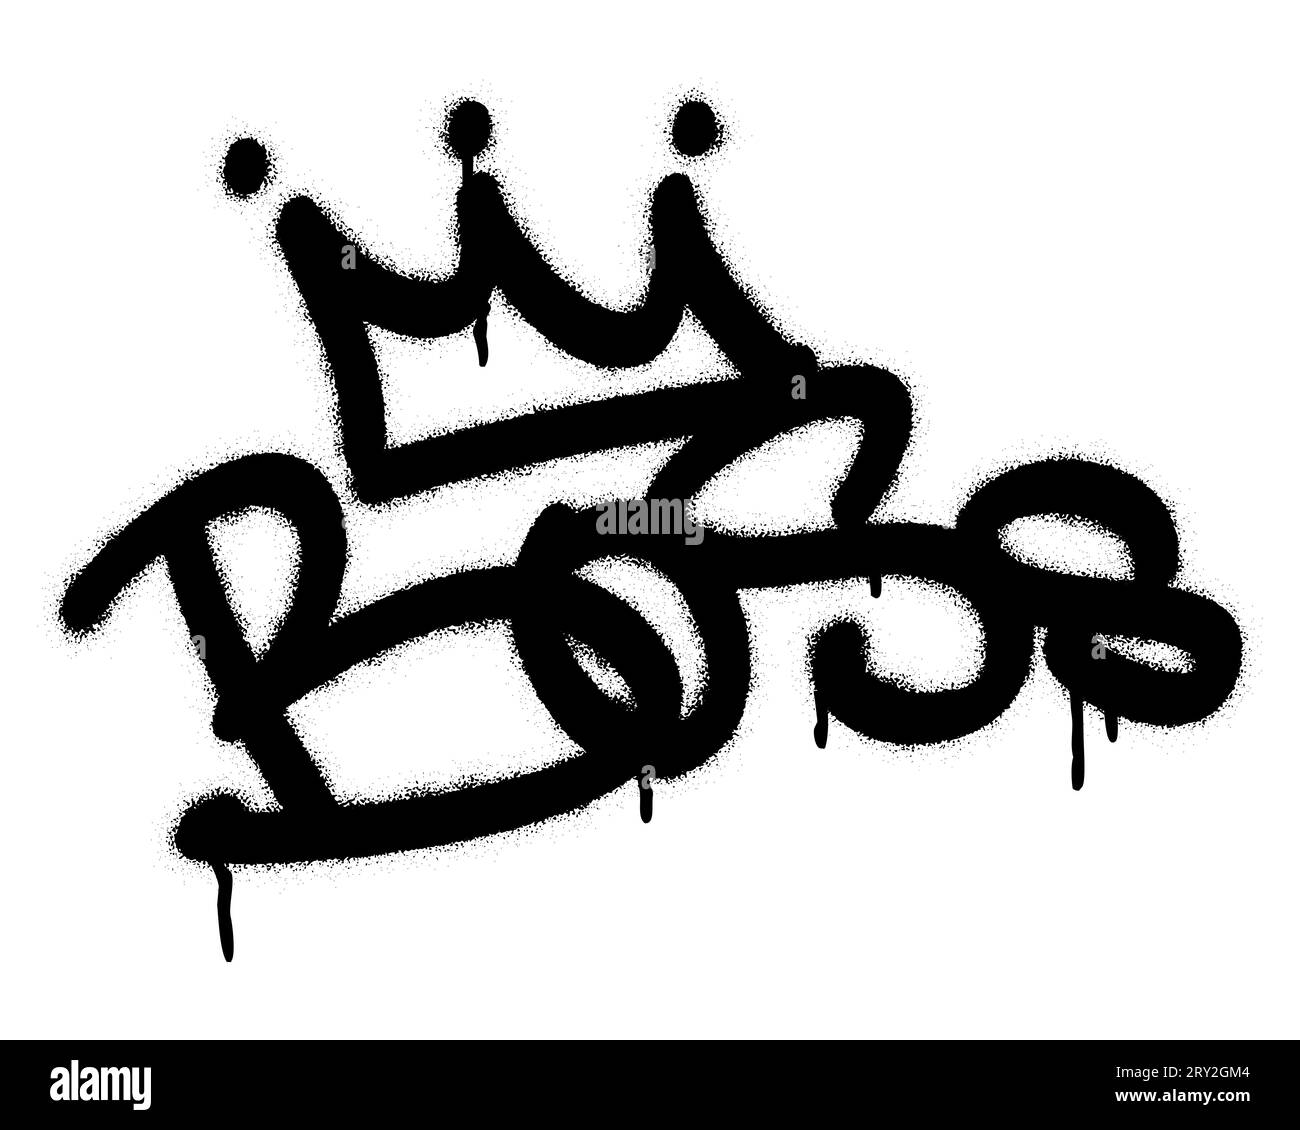 Spray graffiti tagging word BOSS and stylized crown. Stock Vector